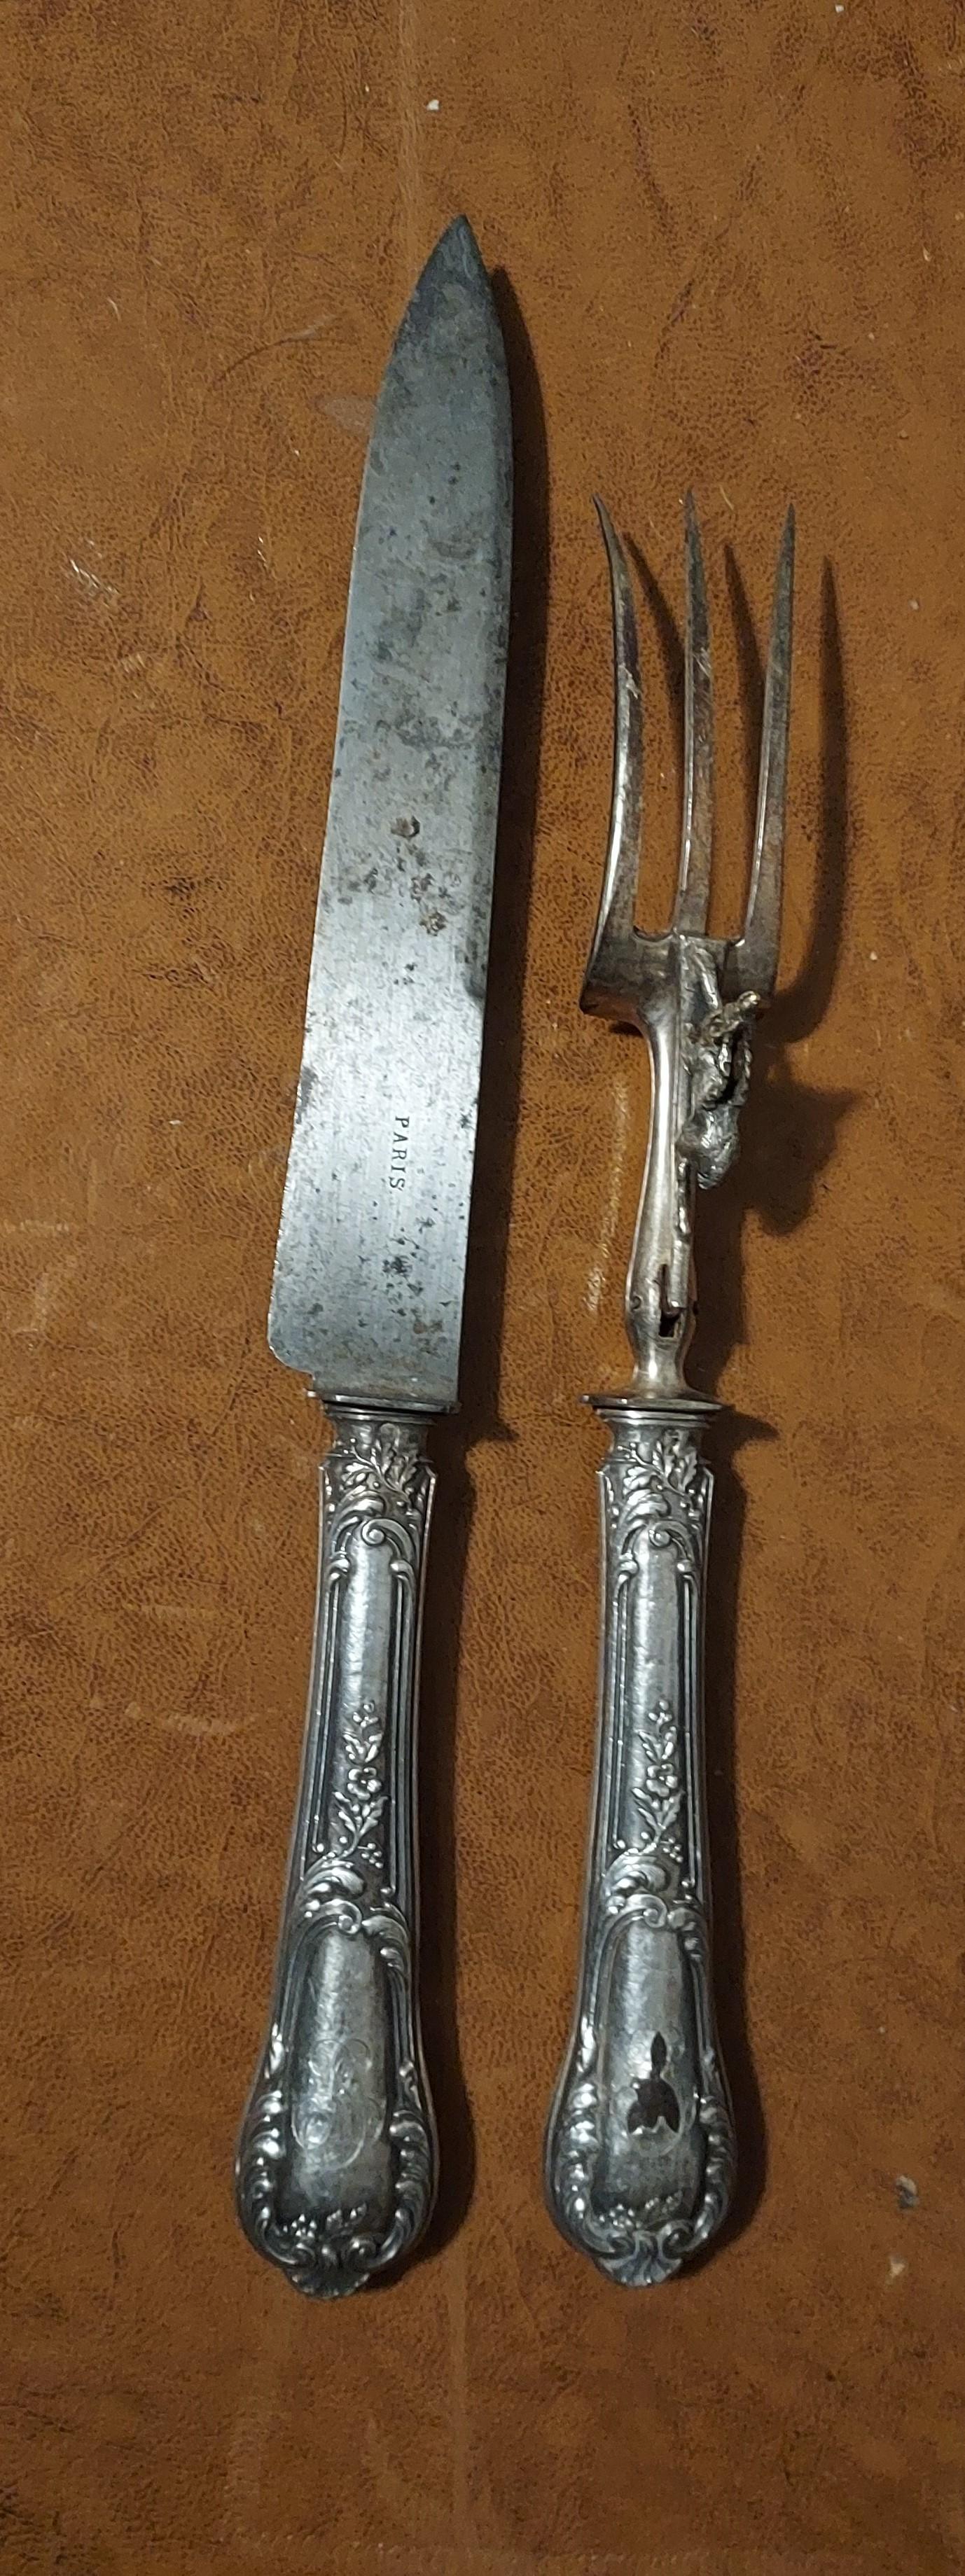 Antique Silver Carving Set of Knofe and Fork embellished with a protective Stag In Good Condition For Sale In Perth, GB